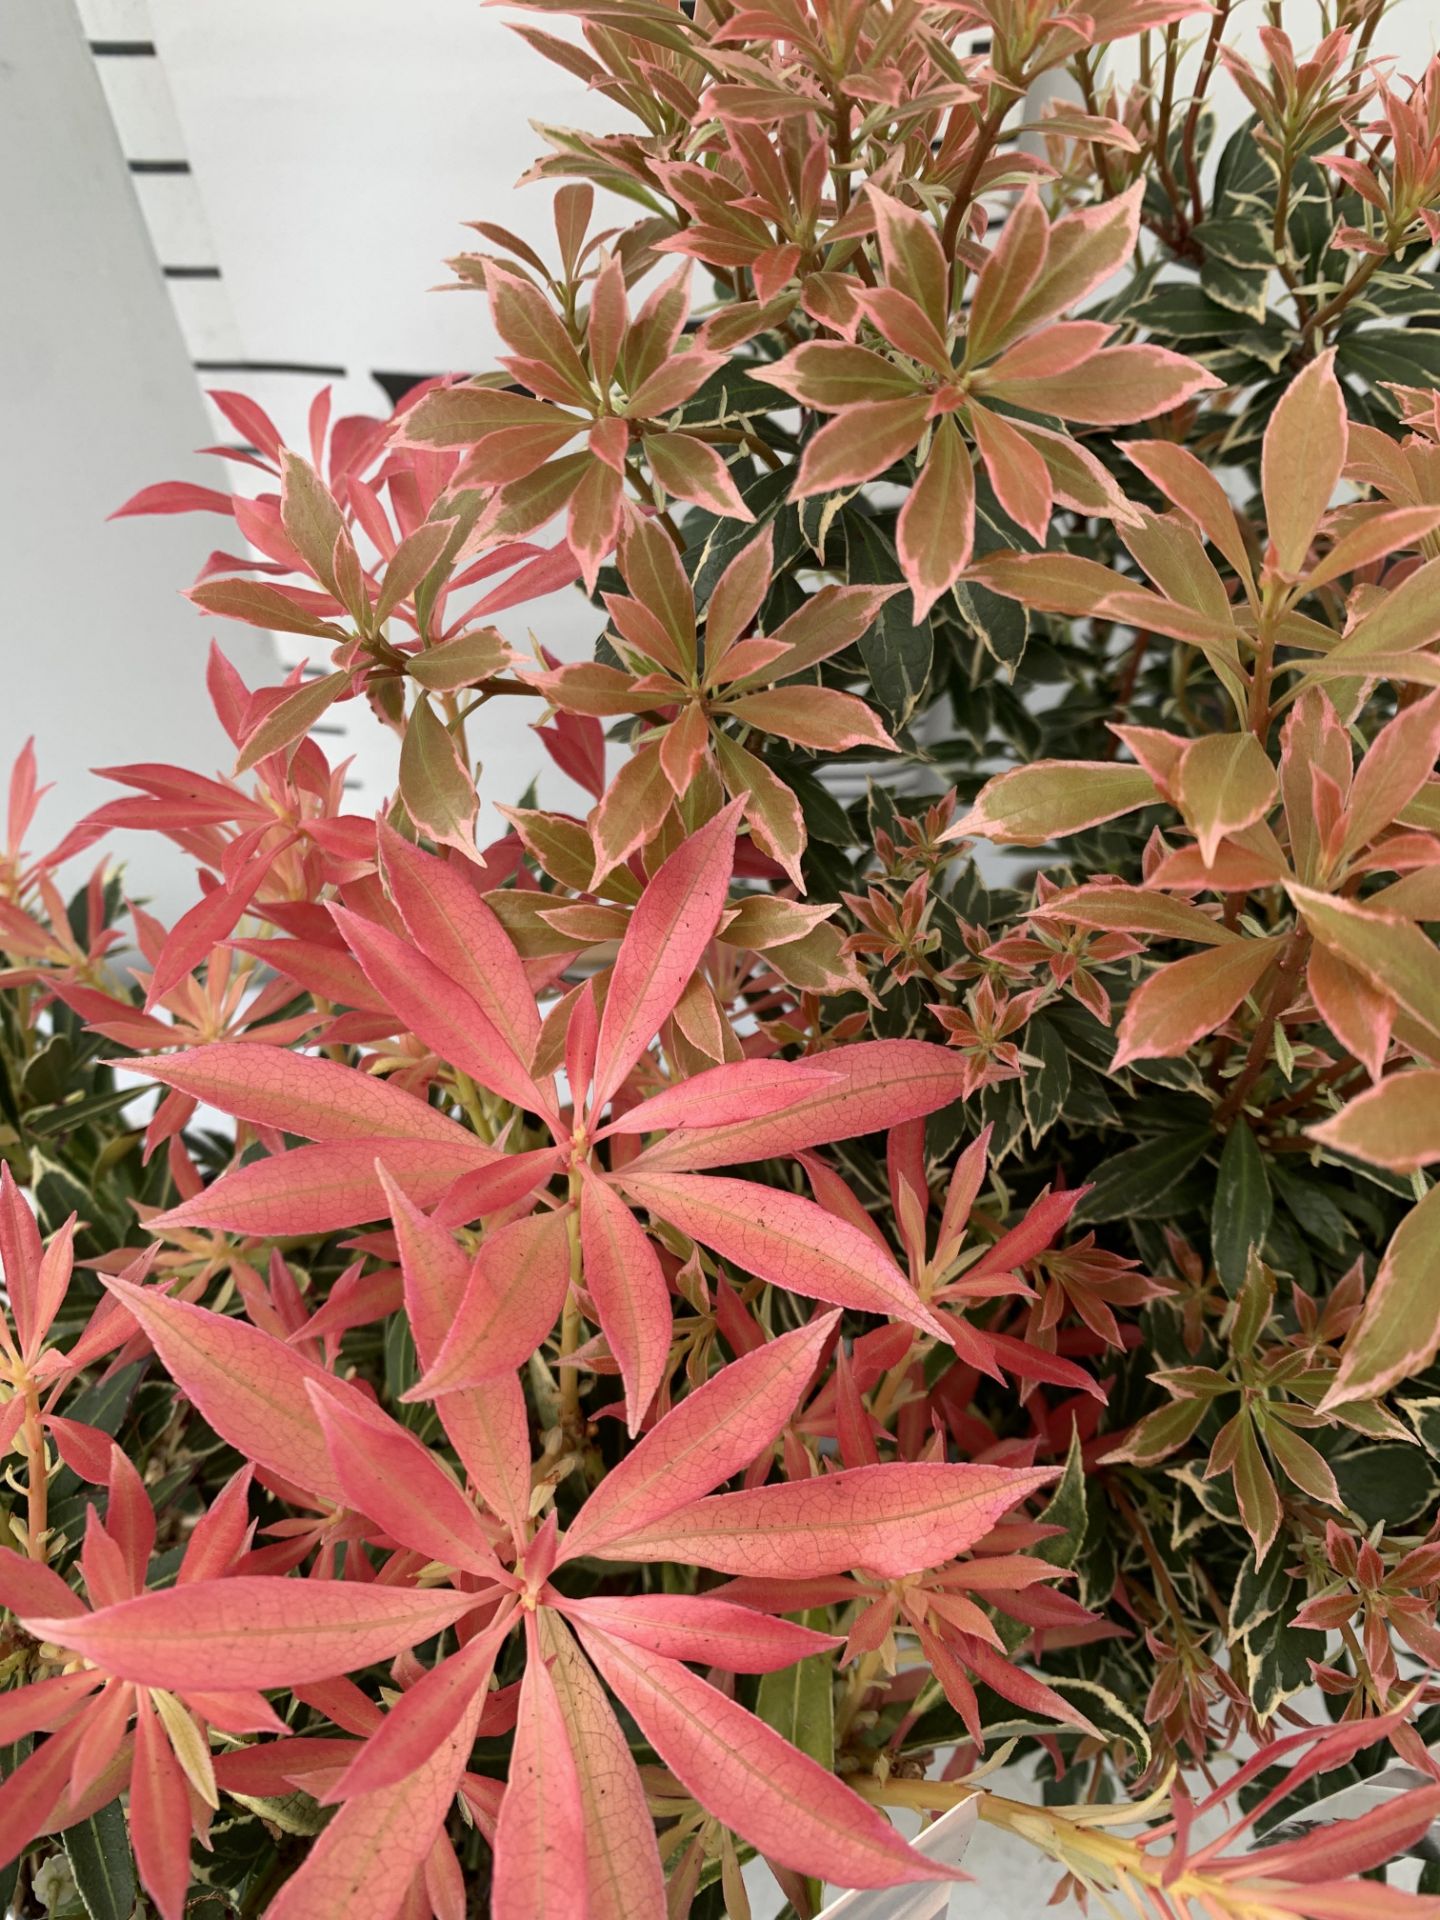 TWO PIERIS JAPONICA LITTLE HEATH AND FLAMING SILVER IN 3 LTR POTS 45CM TALL PLUS VAT TO BE SOLD - Image 9 of 10